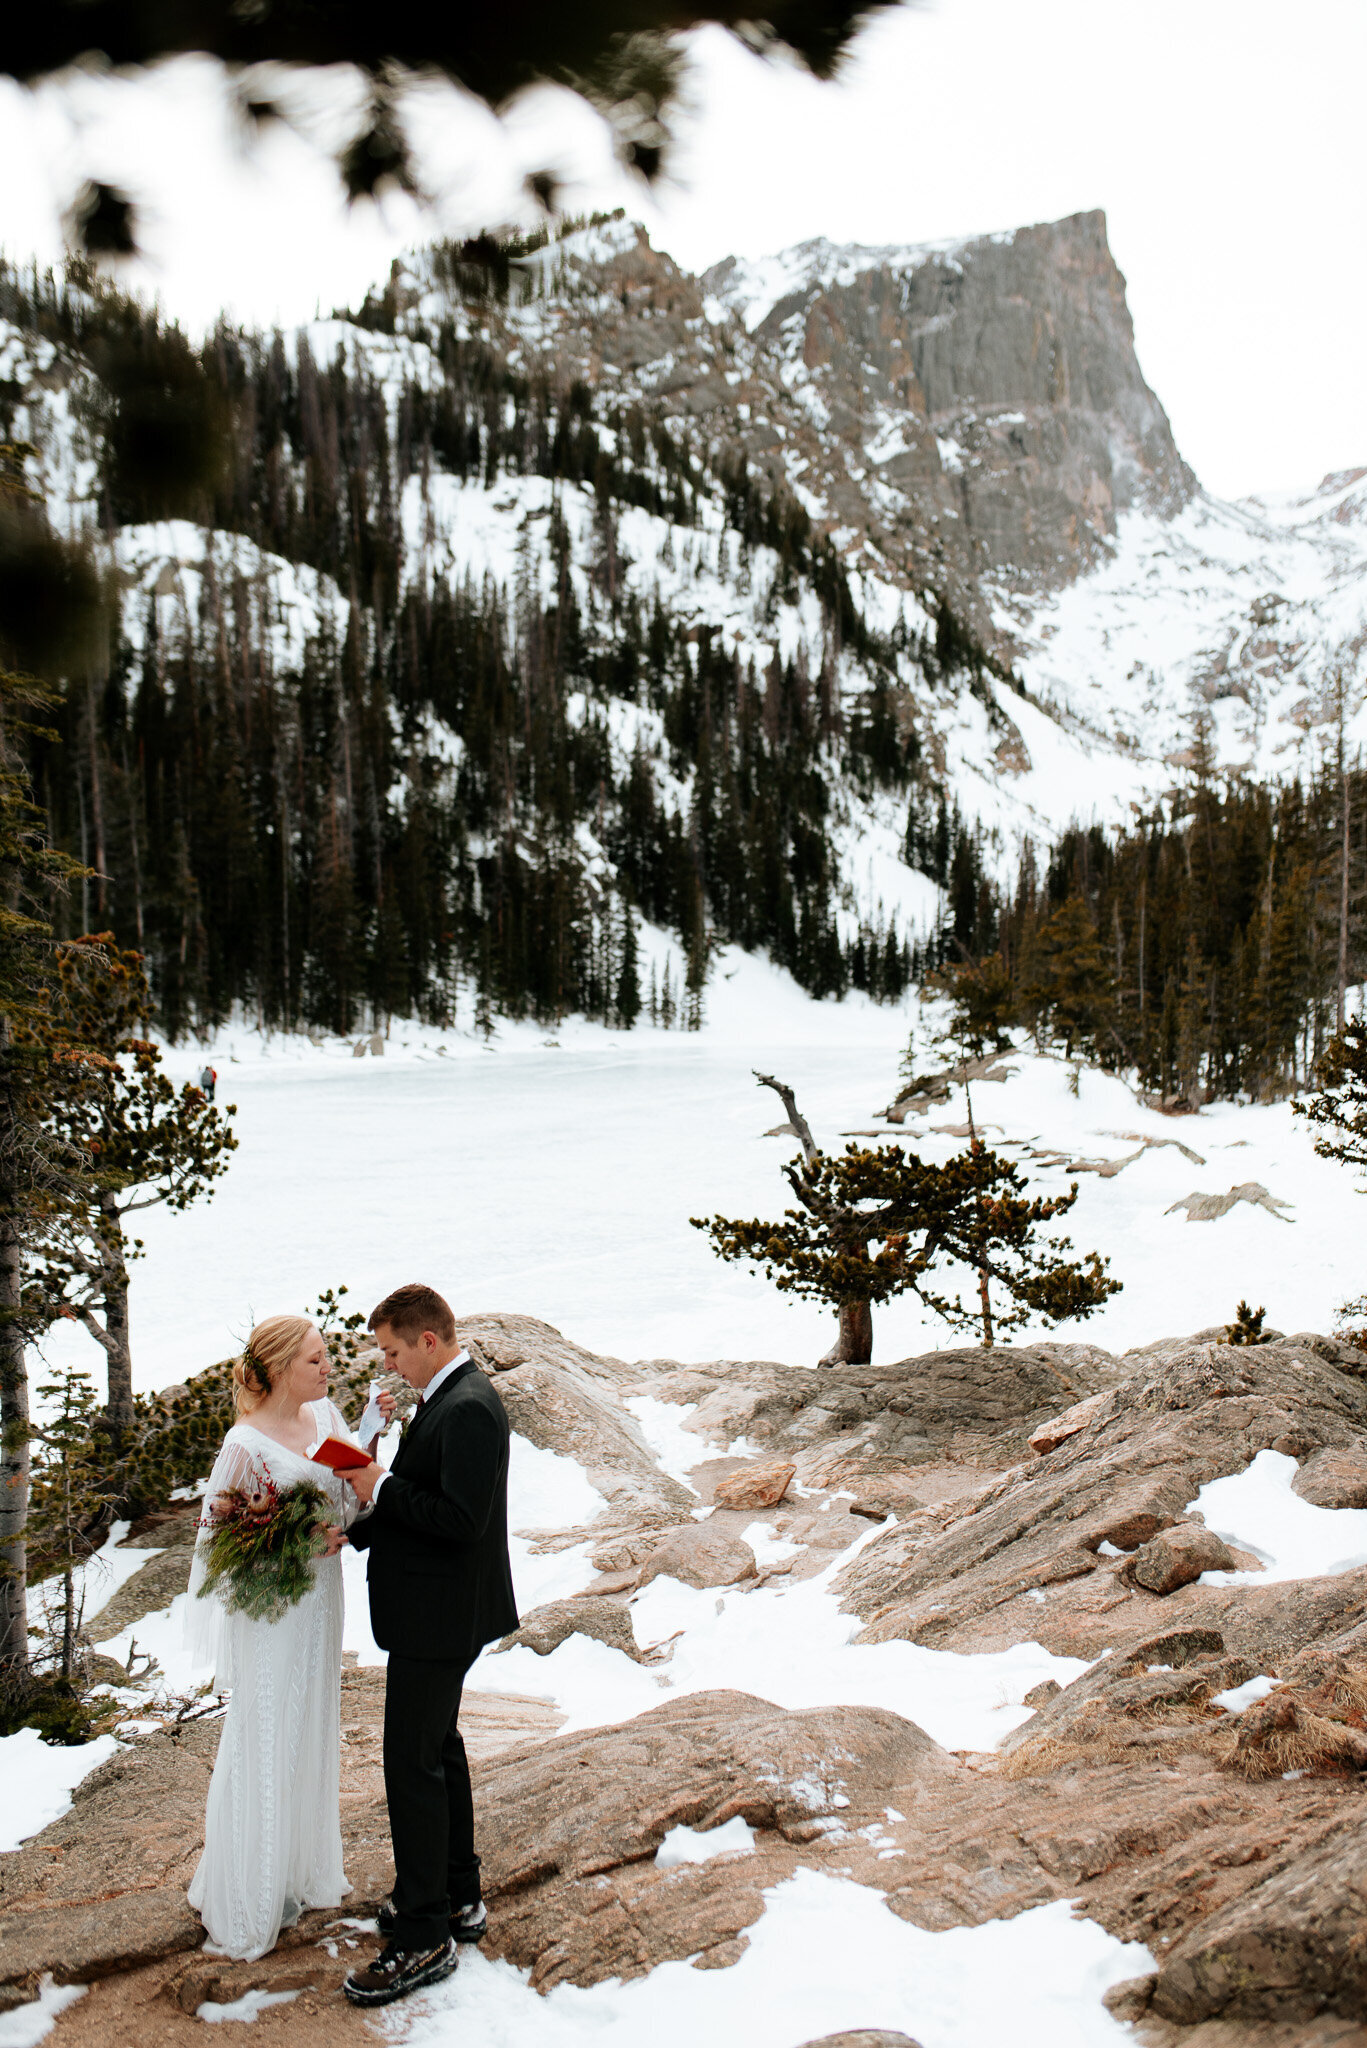 Goregeous elopment photos of bride and groom in Rocky Mountain National Park in the snow.